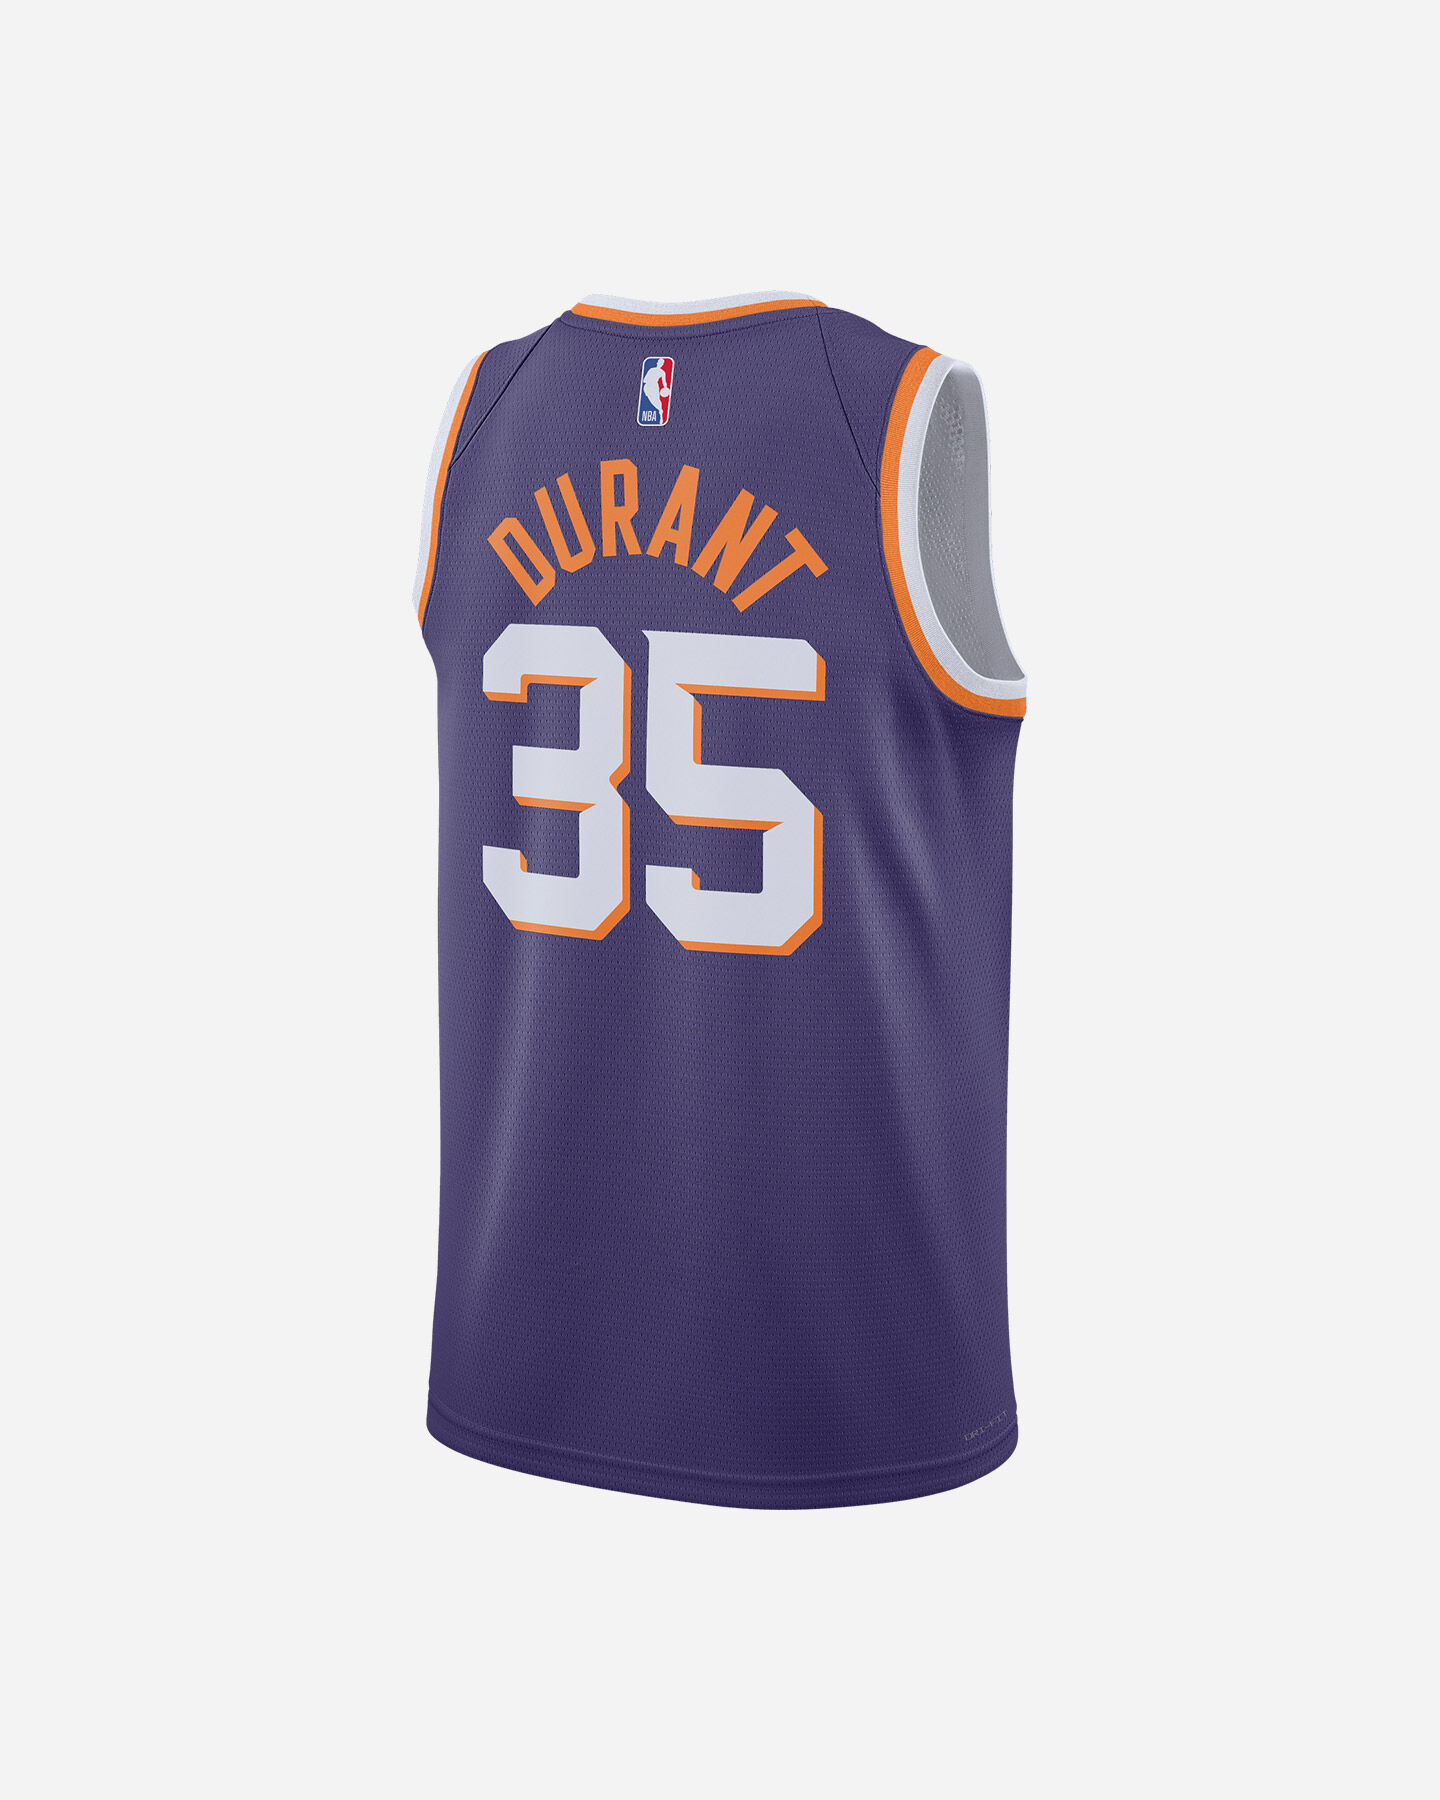  Canotta basket NIKE ICON PHOENIX DURANT KEVIN SWING 23 M S5646819|570|S scatto 1